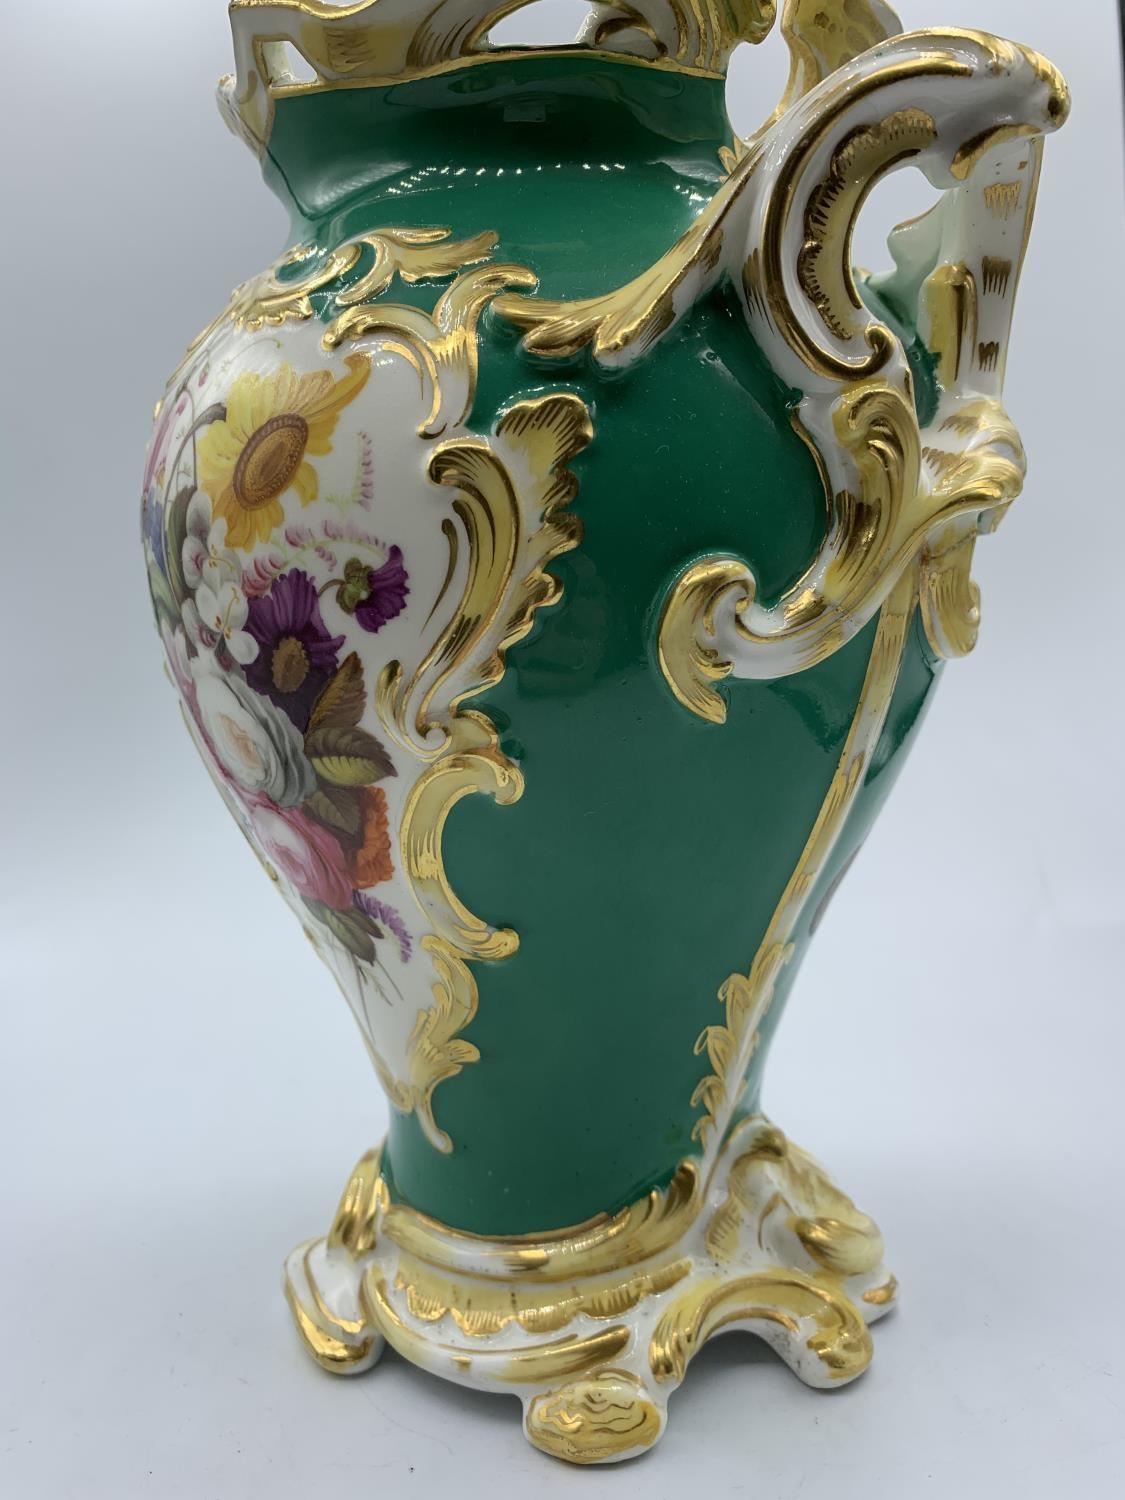 Green Baroque style Vase with Floral print and handles, circa 1880, 23cm tall - Image 4 of 7